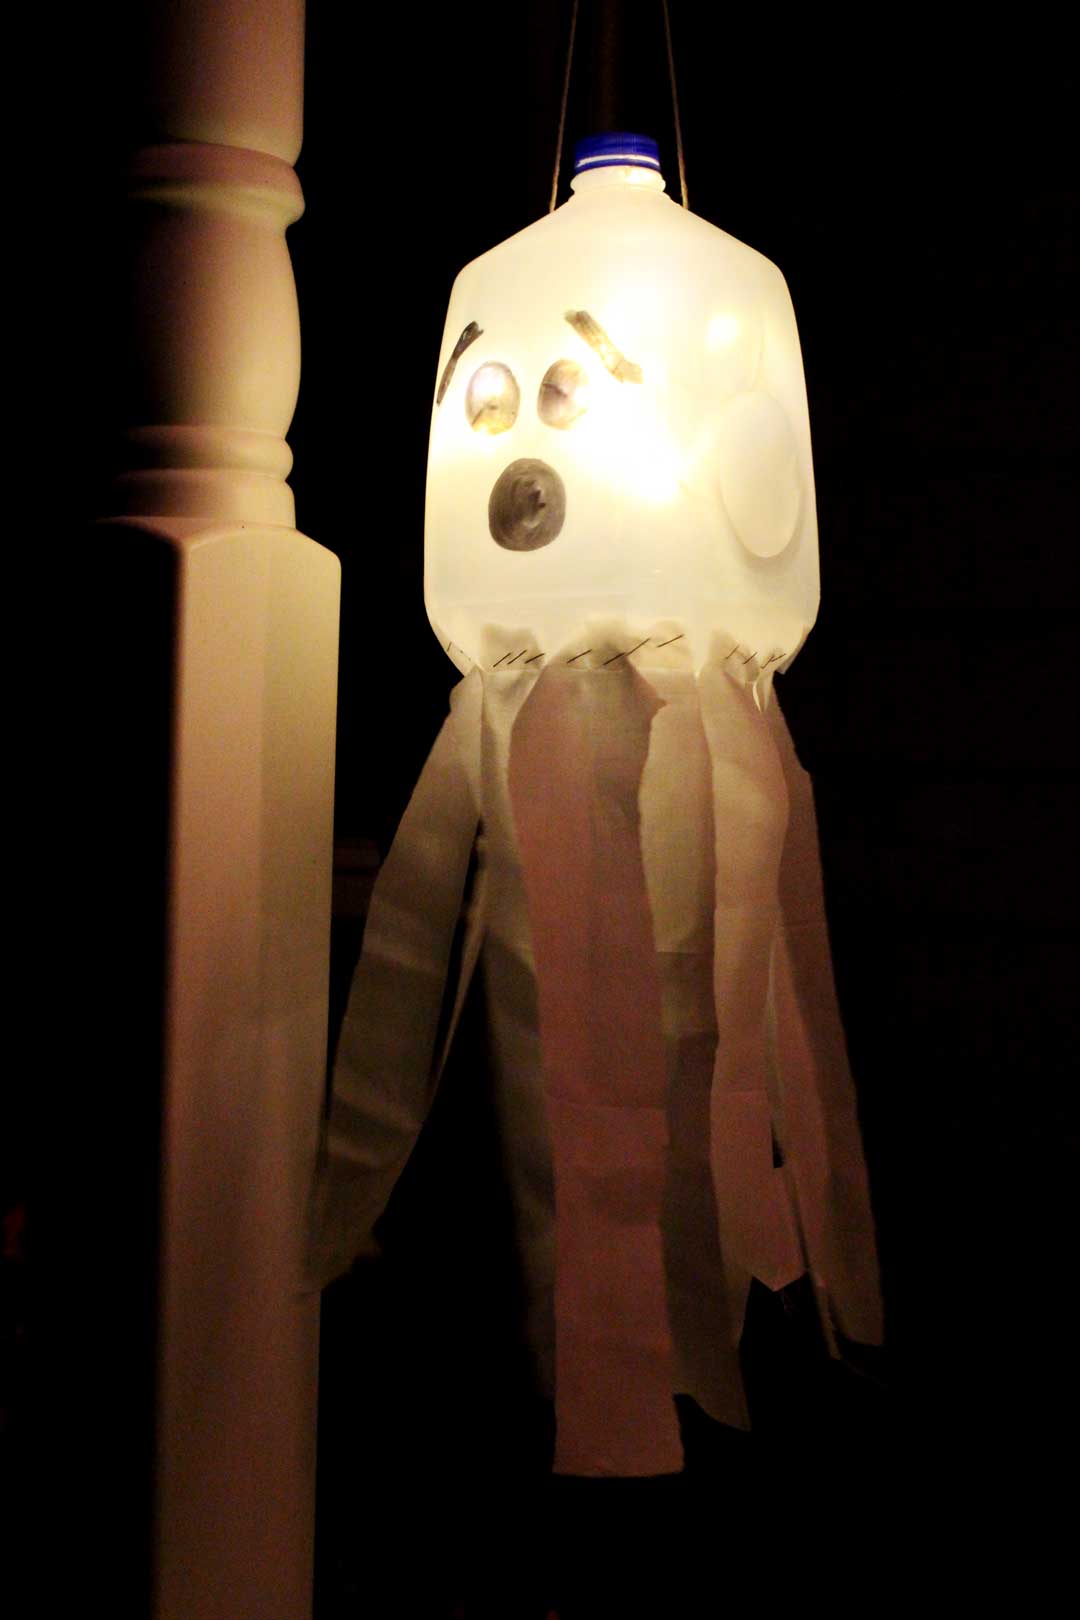 A recycled milk jug with a face drawn on it to create a glowing ghost luminary hanging on a porch at night.